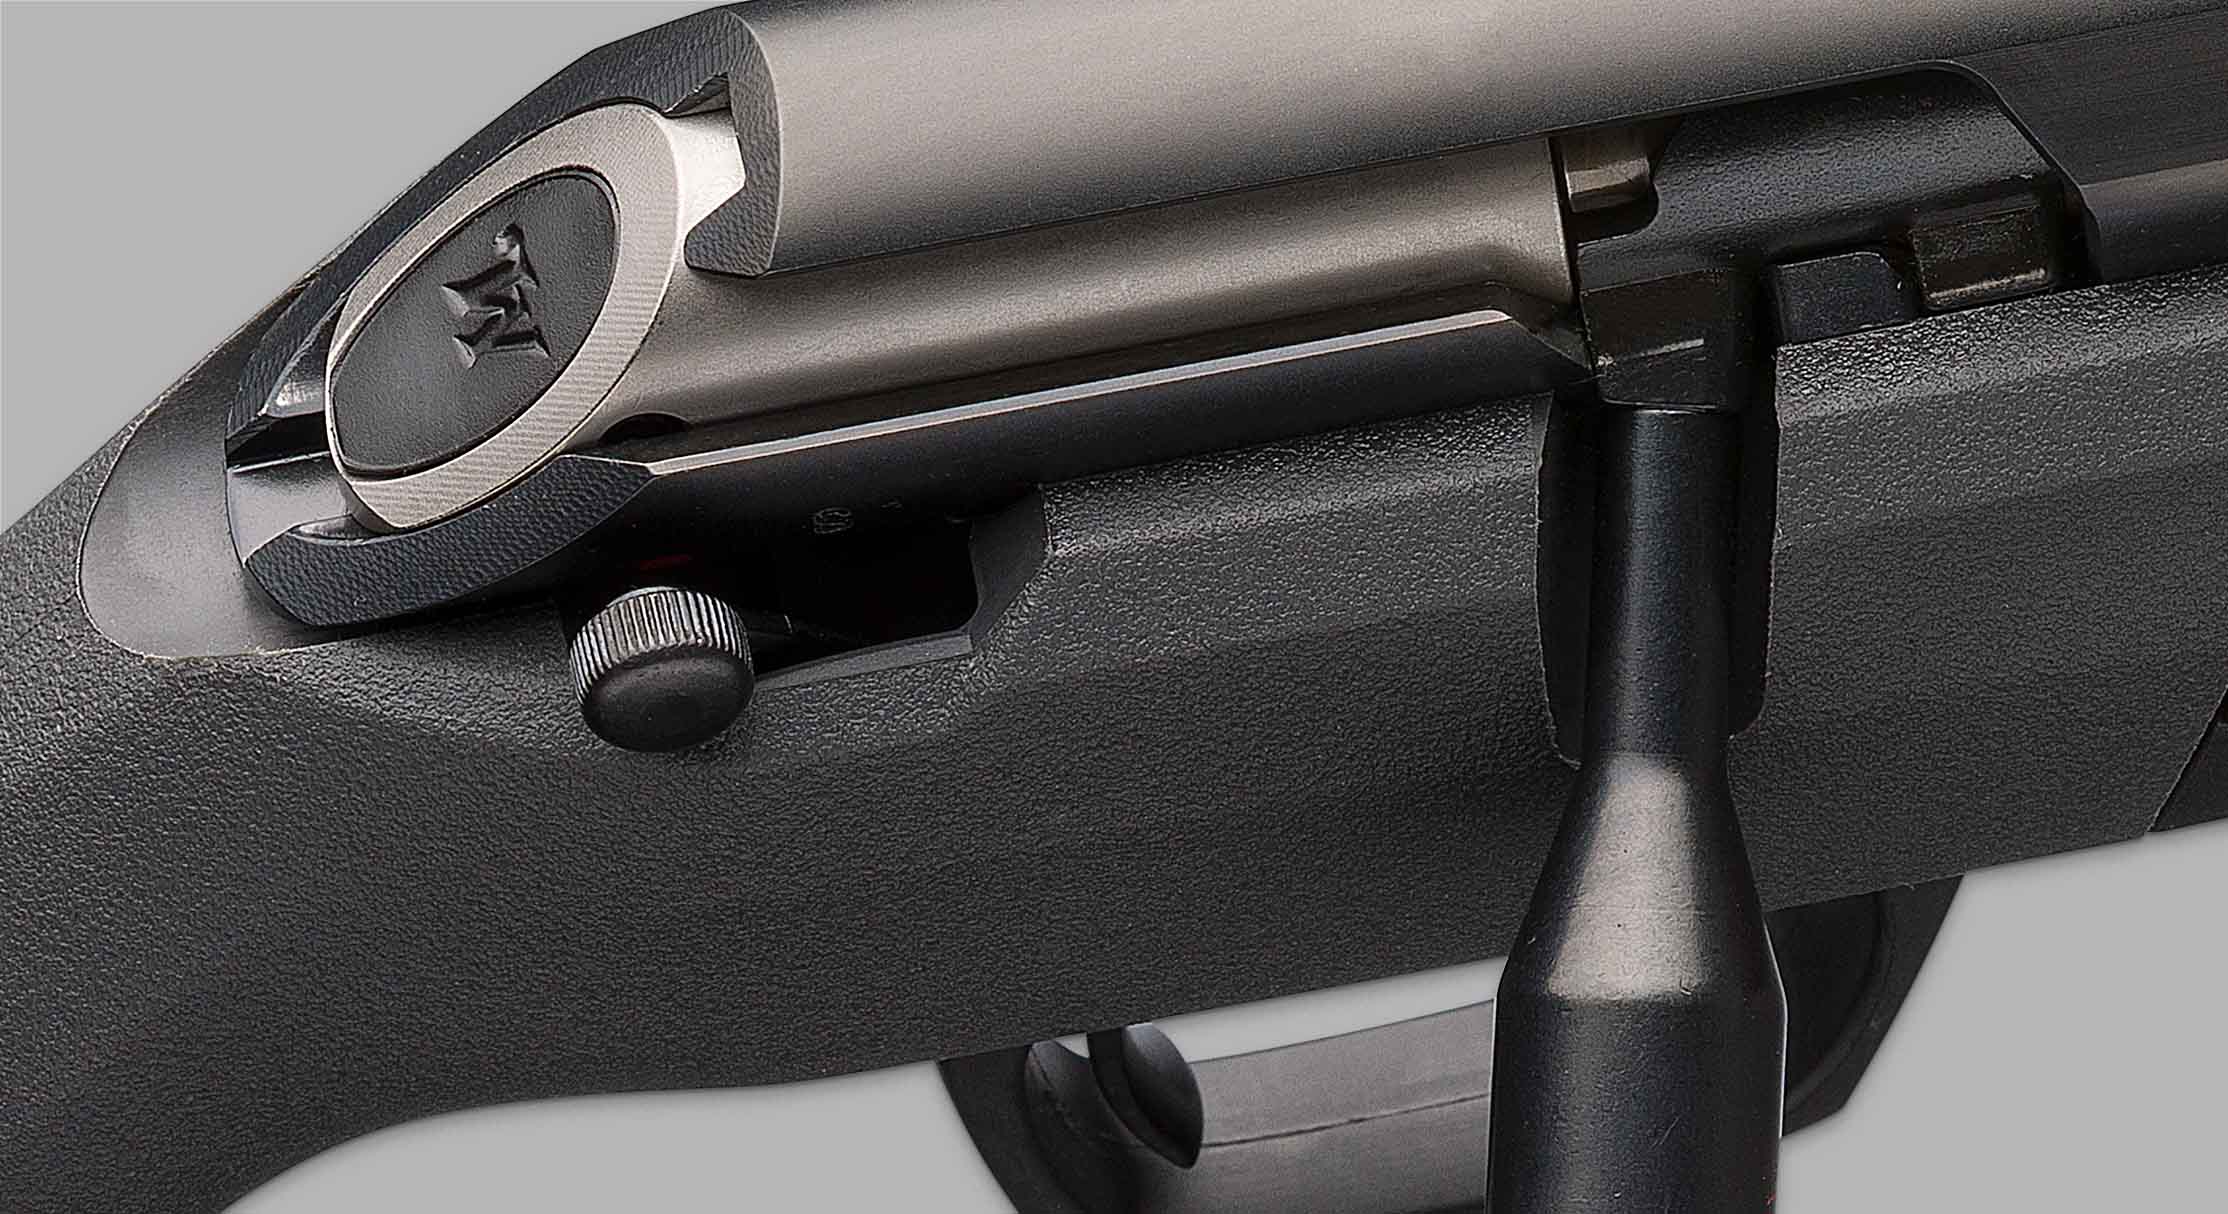 Wildcat Removable Lower Receiver Assembly